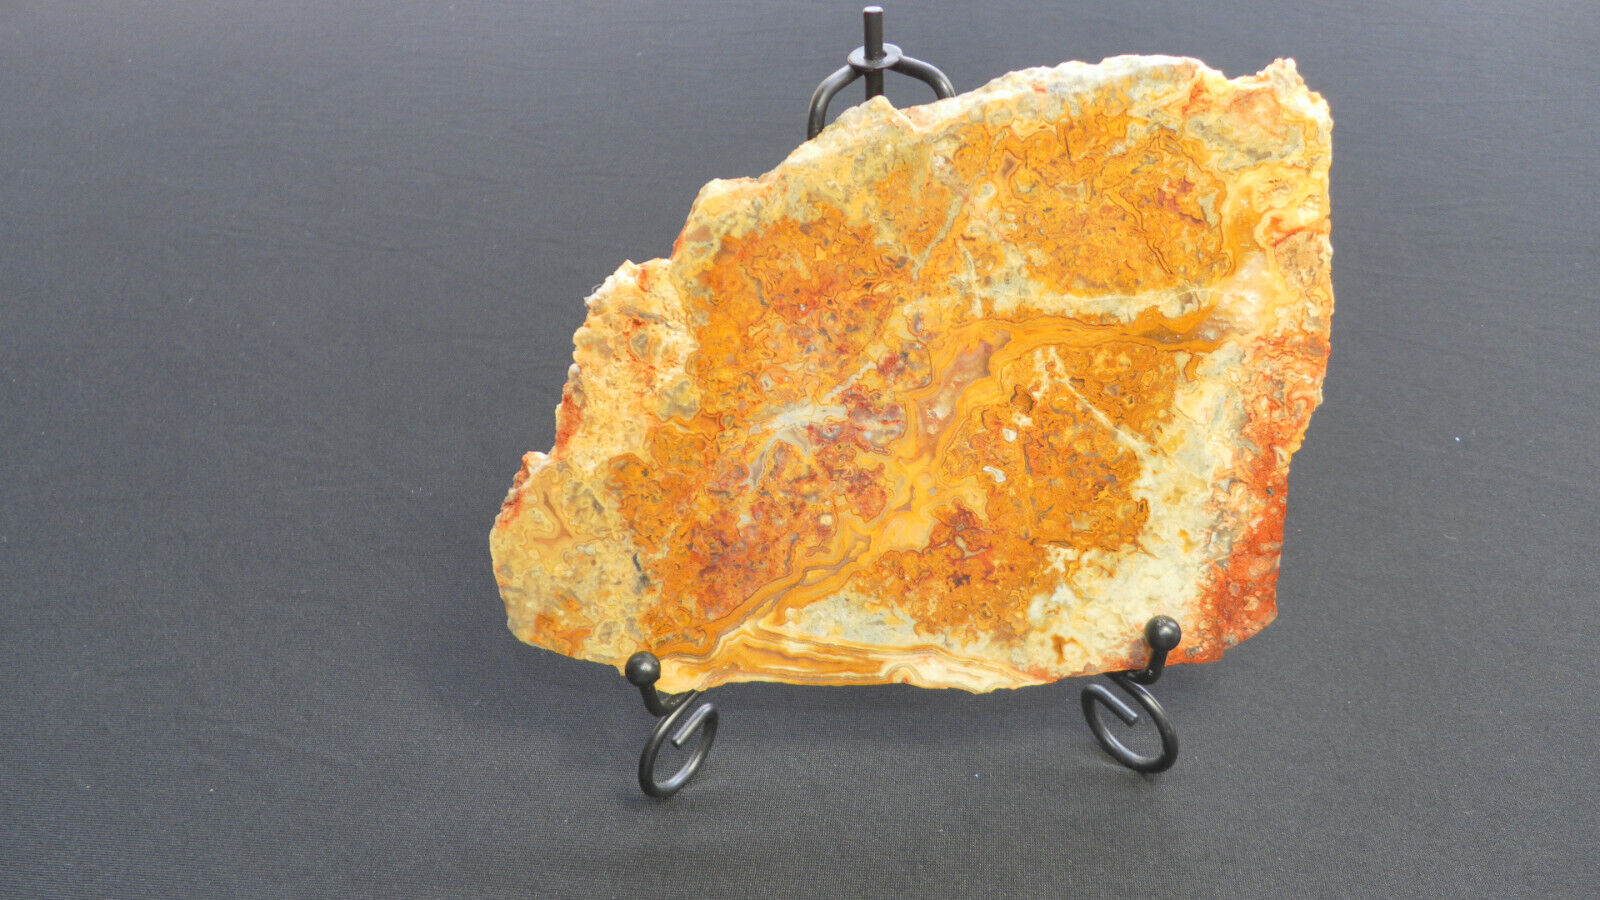 Lapidary Art Decor, Brilliant Yellow Lace from Australia Unique gifts for anyone